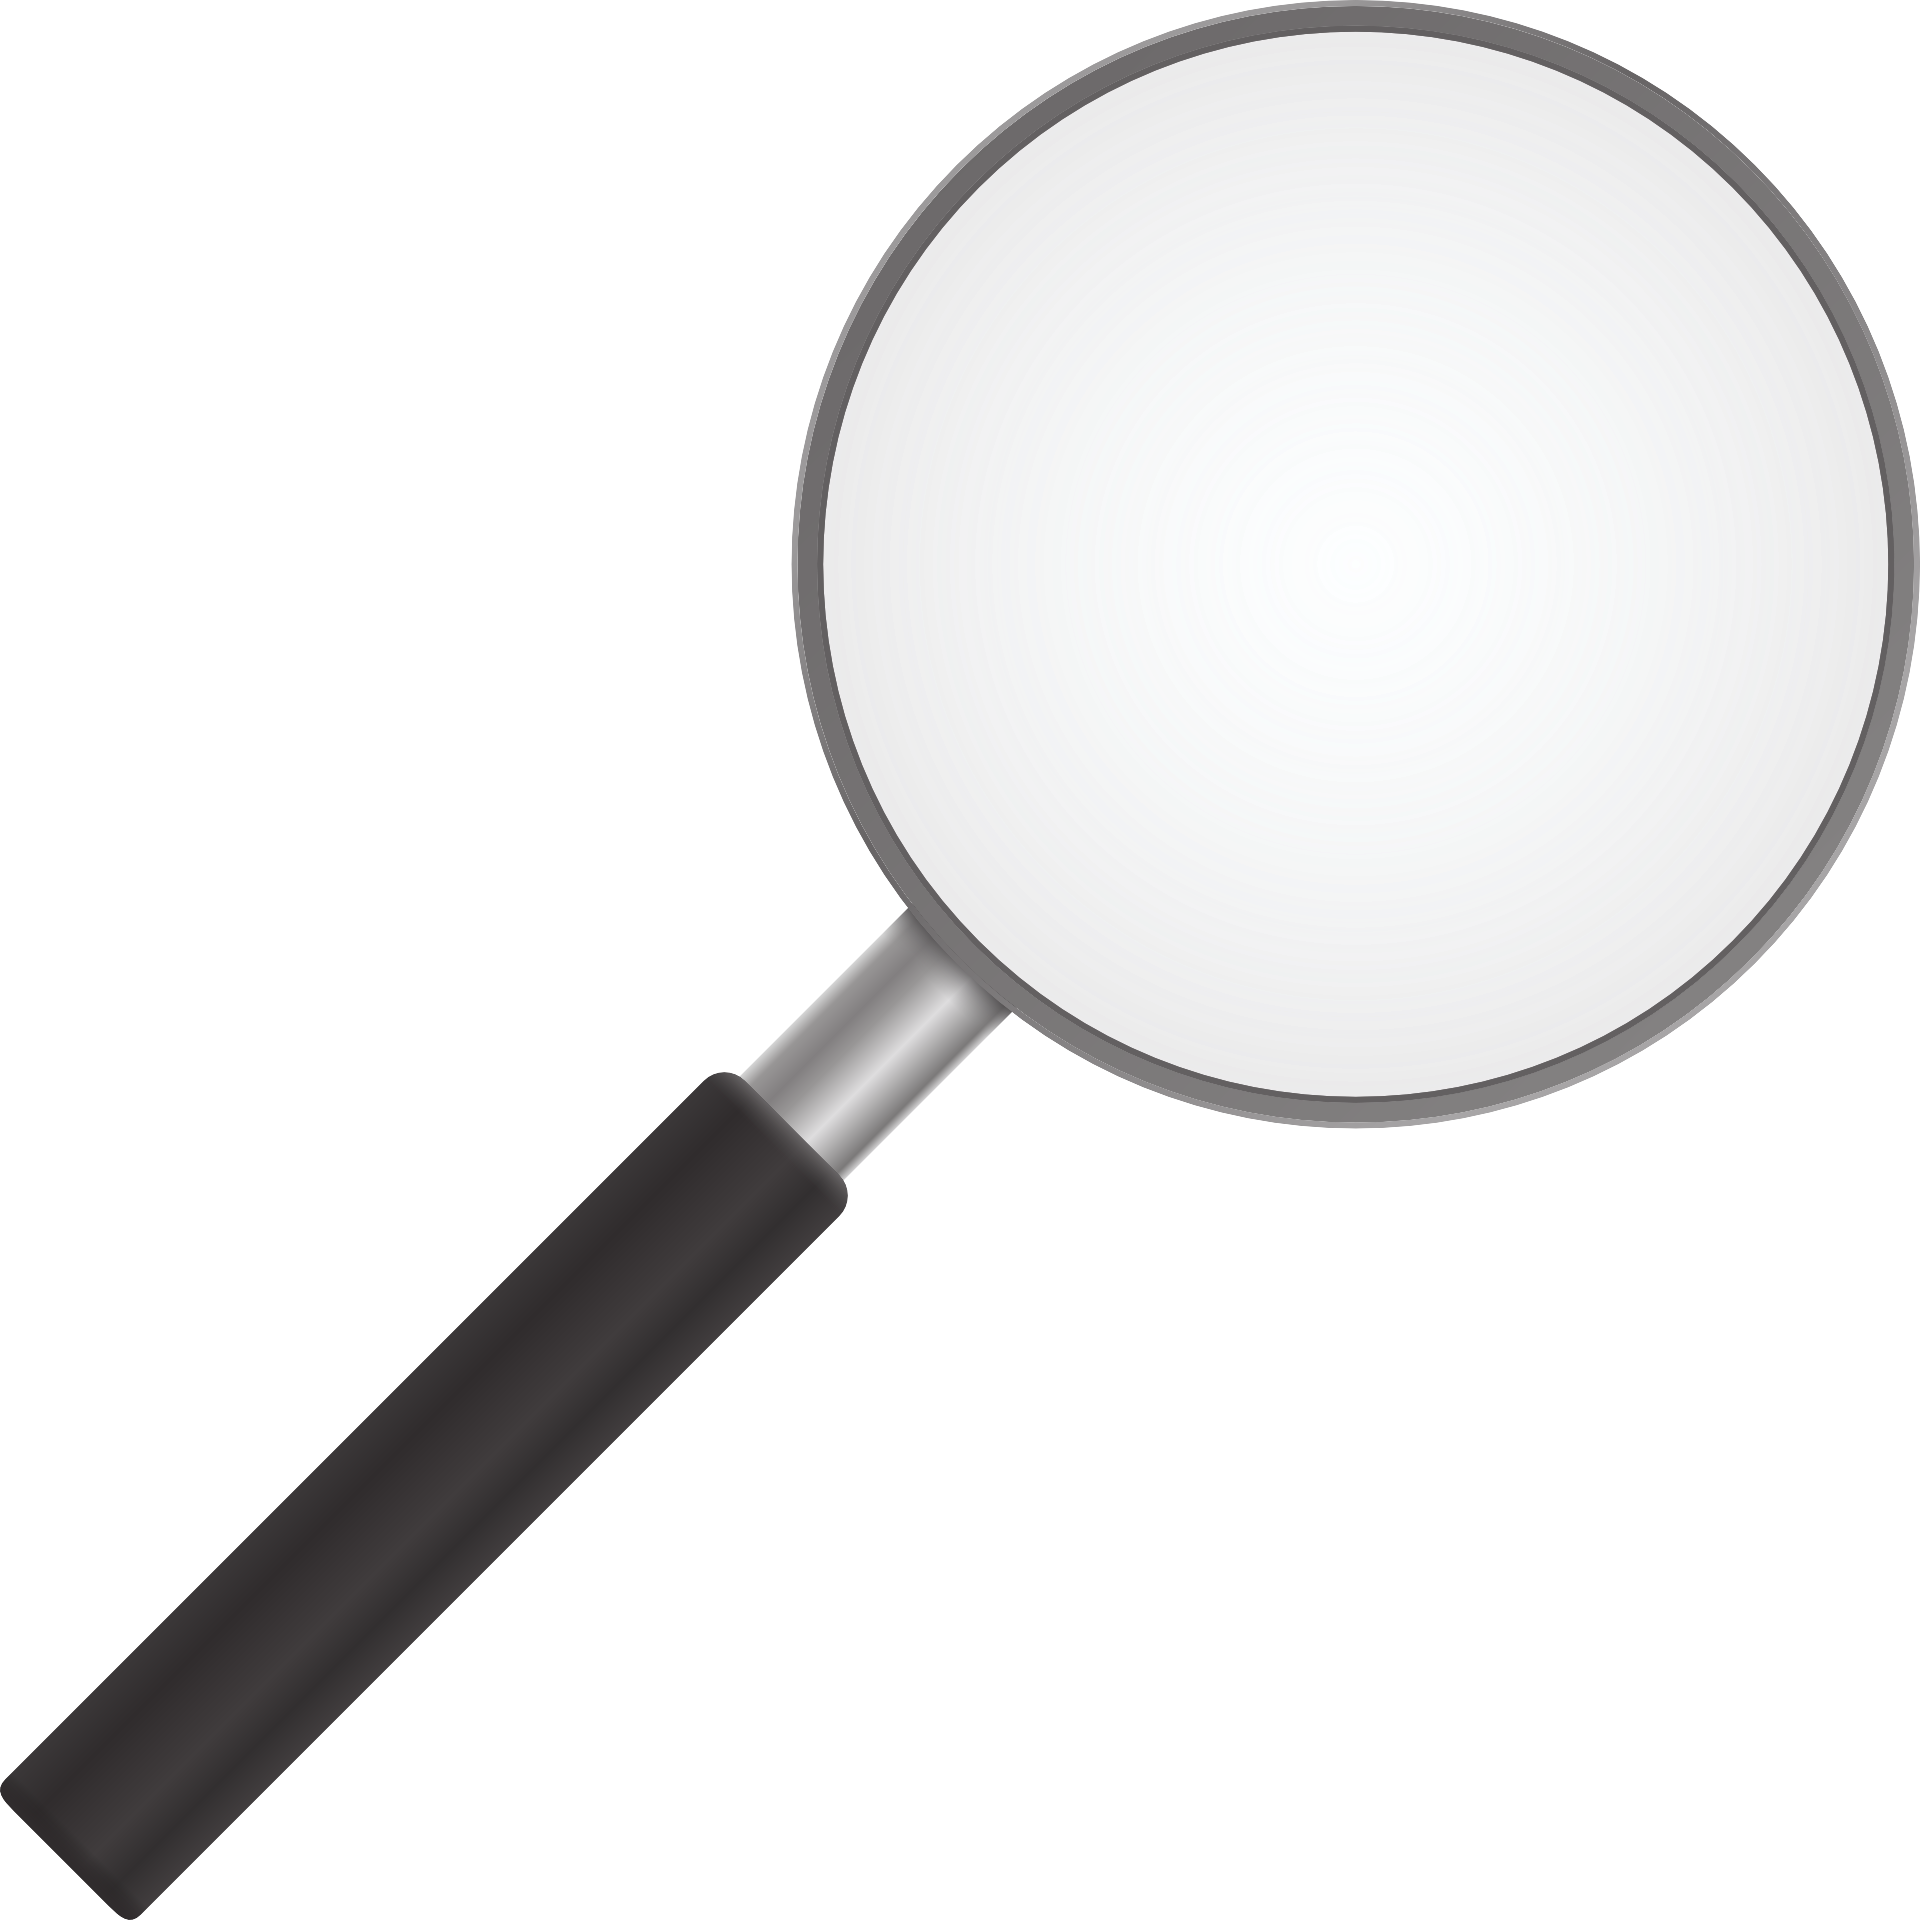 Magnifying Glass Clip Art - Magnifying Glass Transparent Background (1920x1920)